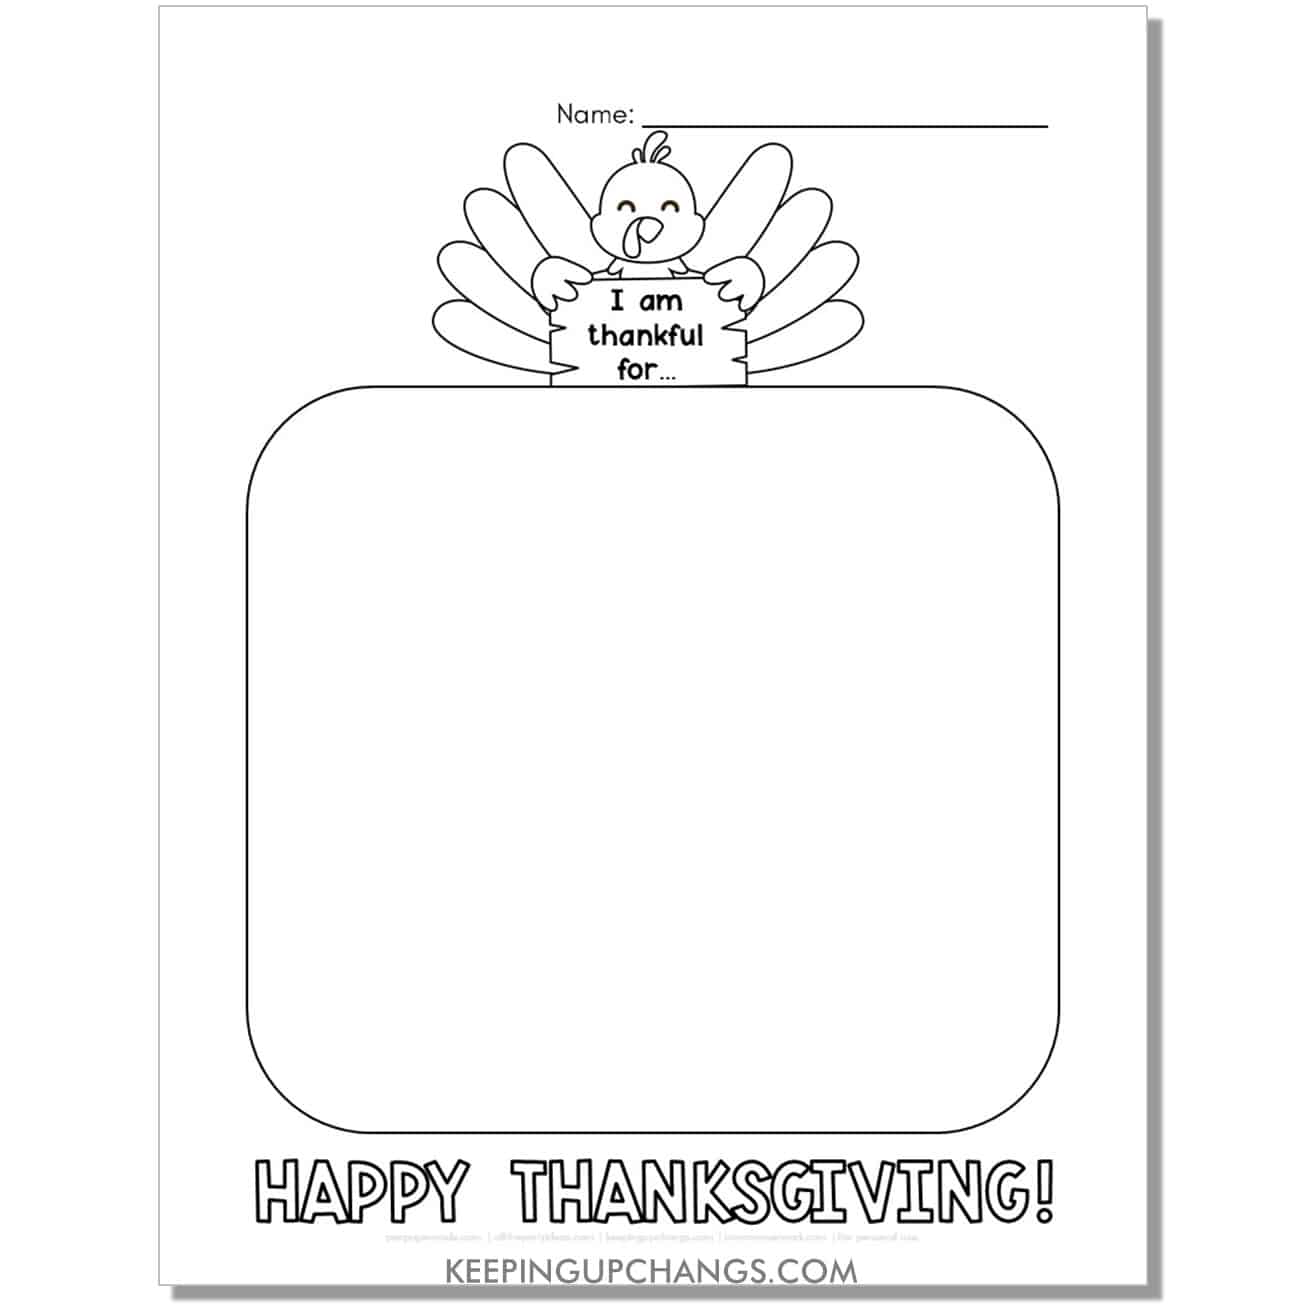 i am thankful for thanksgiving turkey template worksheet with large drawing box.